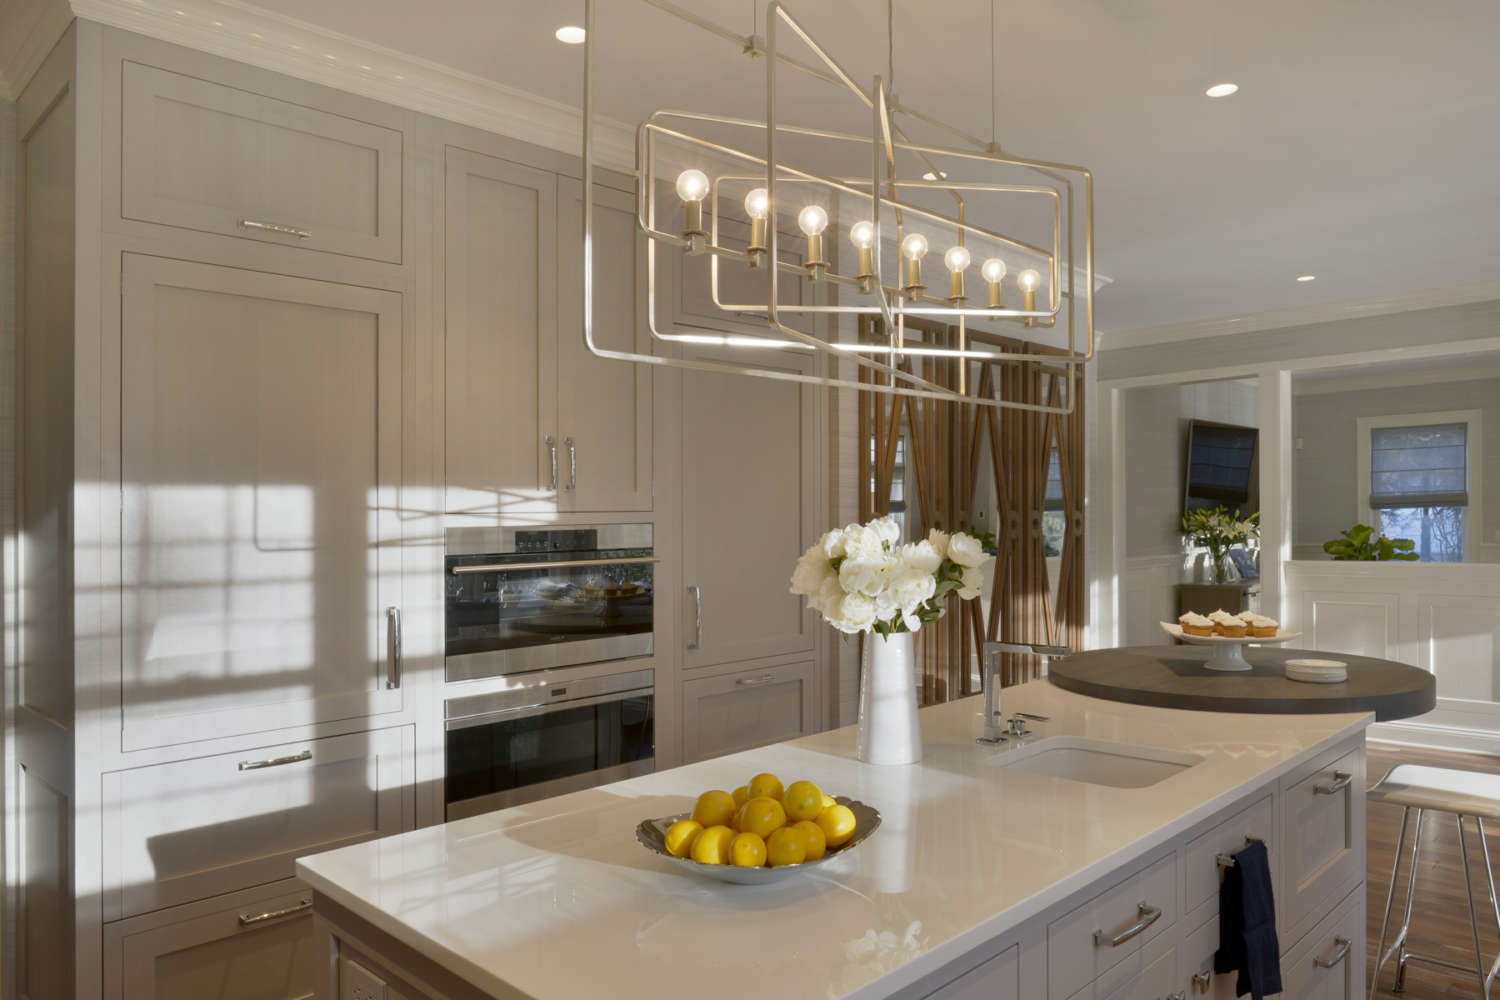 Island of open U-shaped kitchen in Rye NY features white quartz countertops, rift cut whote oak shaker style Bioltta Cabinetry, an adjacent table with seating and a dramatic gold geometric chandelier. The kitchen design by Randy O'Kane, CKD, of Bilotta Kitchens also includes fully custom shaker style white painted Bilotta Cabintry.